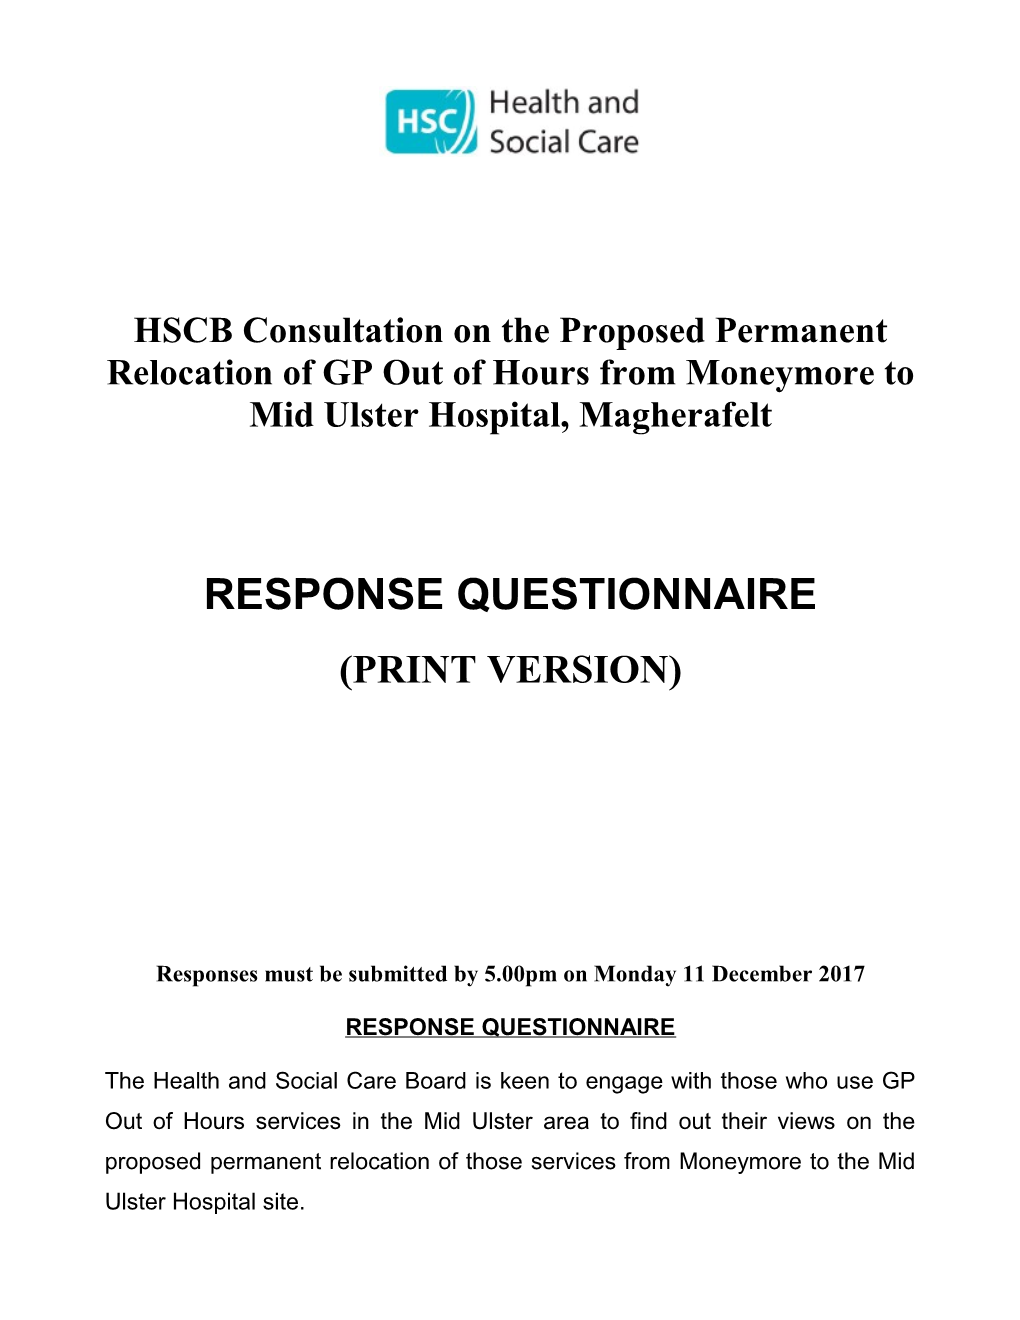 Consultation on the Proposed Permanent Relocation of GP out of Hours from Moneymore To